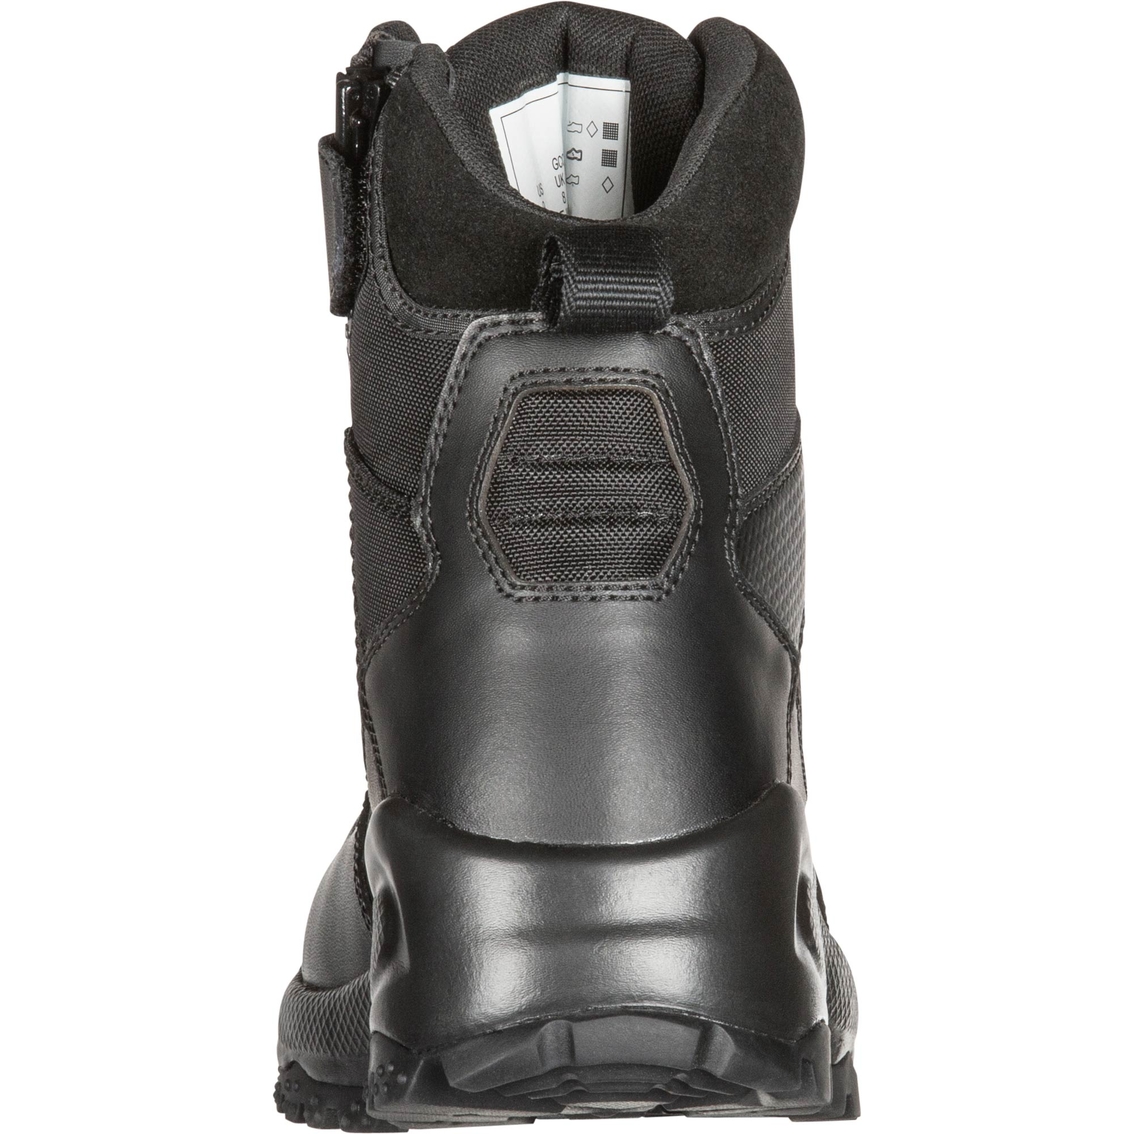 5.11 Men's A.T.A.C. 2.0 6 in. SZ Boots - Image 5 of 5